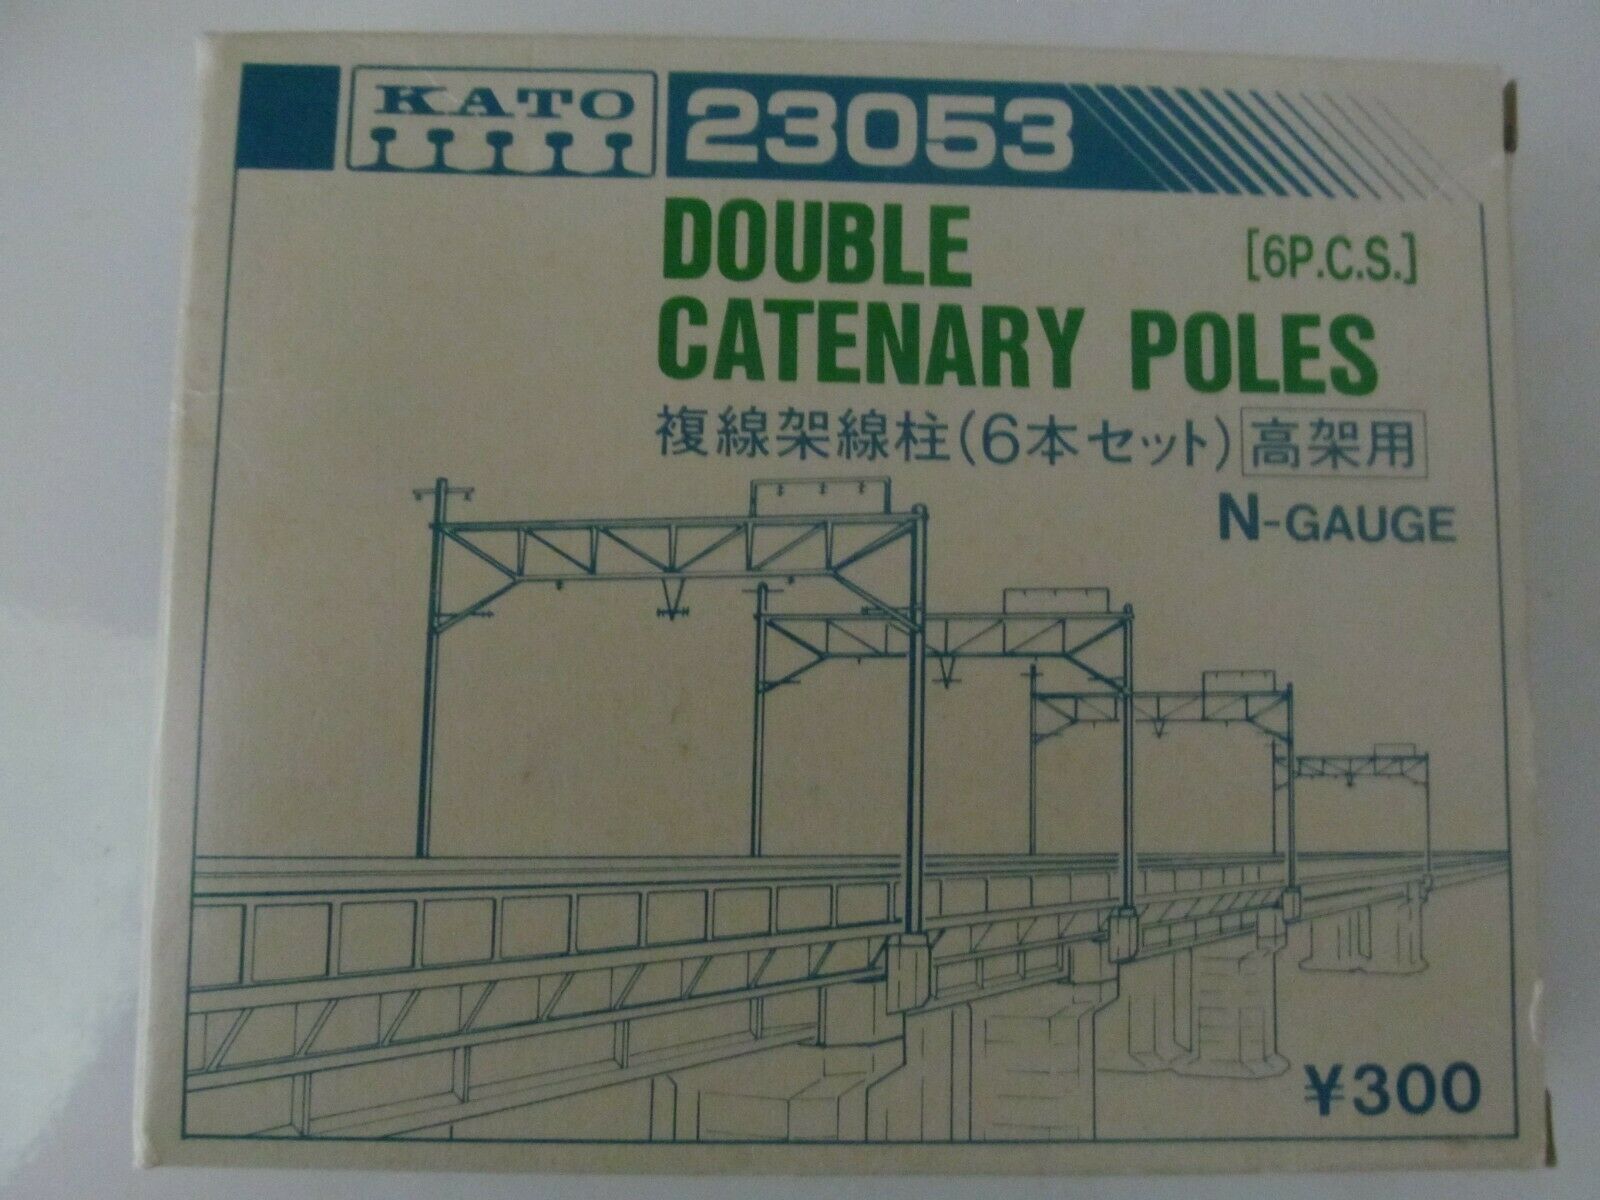 Kato Double Catenary Poles #23053 (6 Pieces) N Scale New In Package